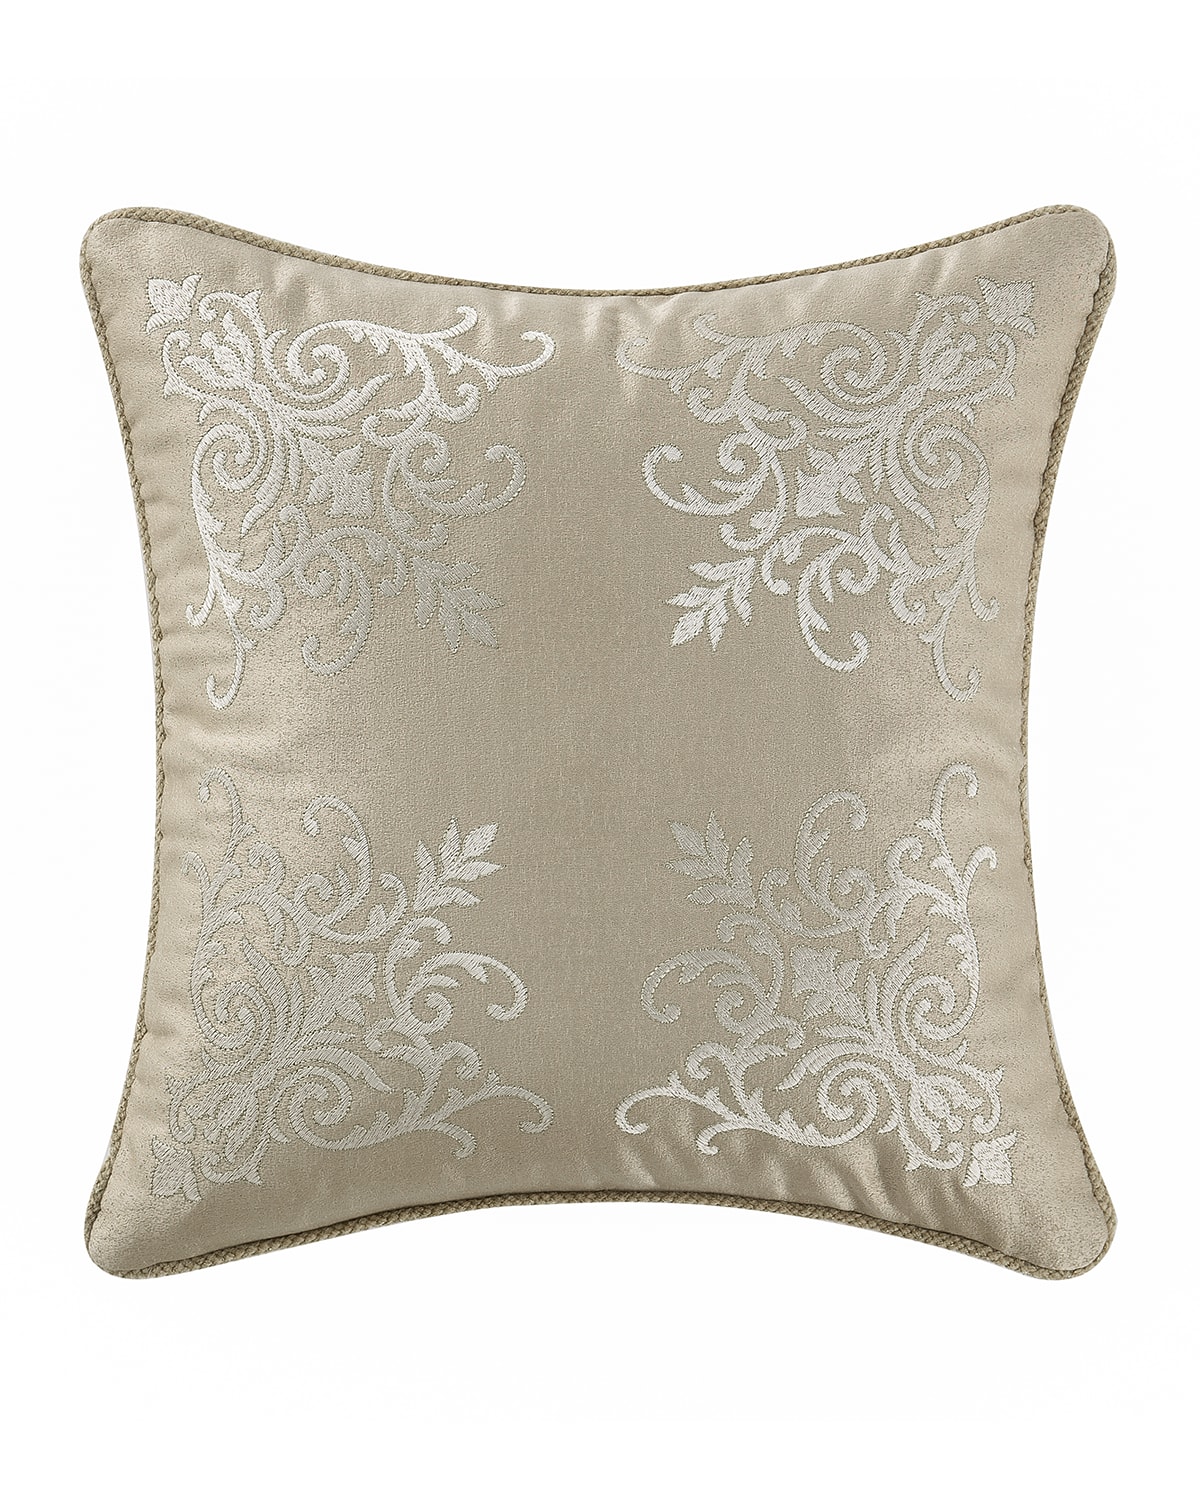 Image Waterford Britt Damask-Embroidered Pillow, 16"Sq.